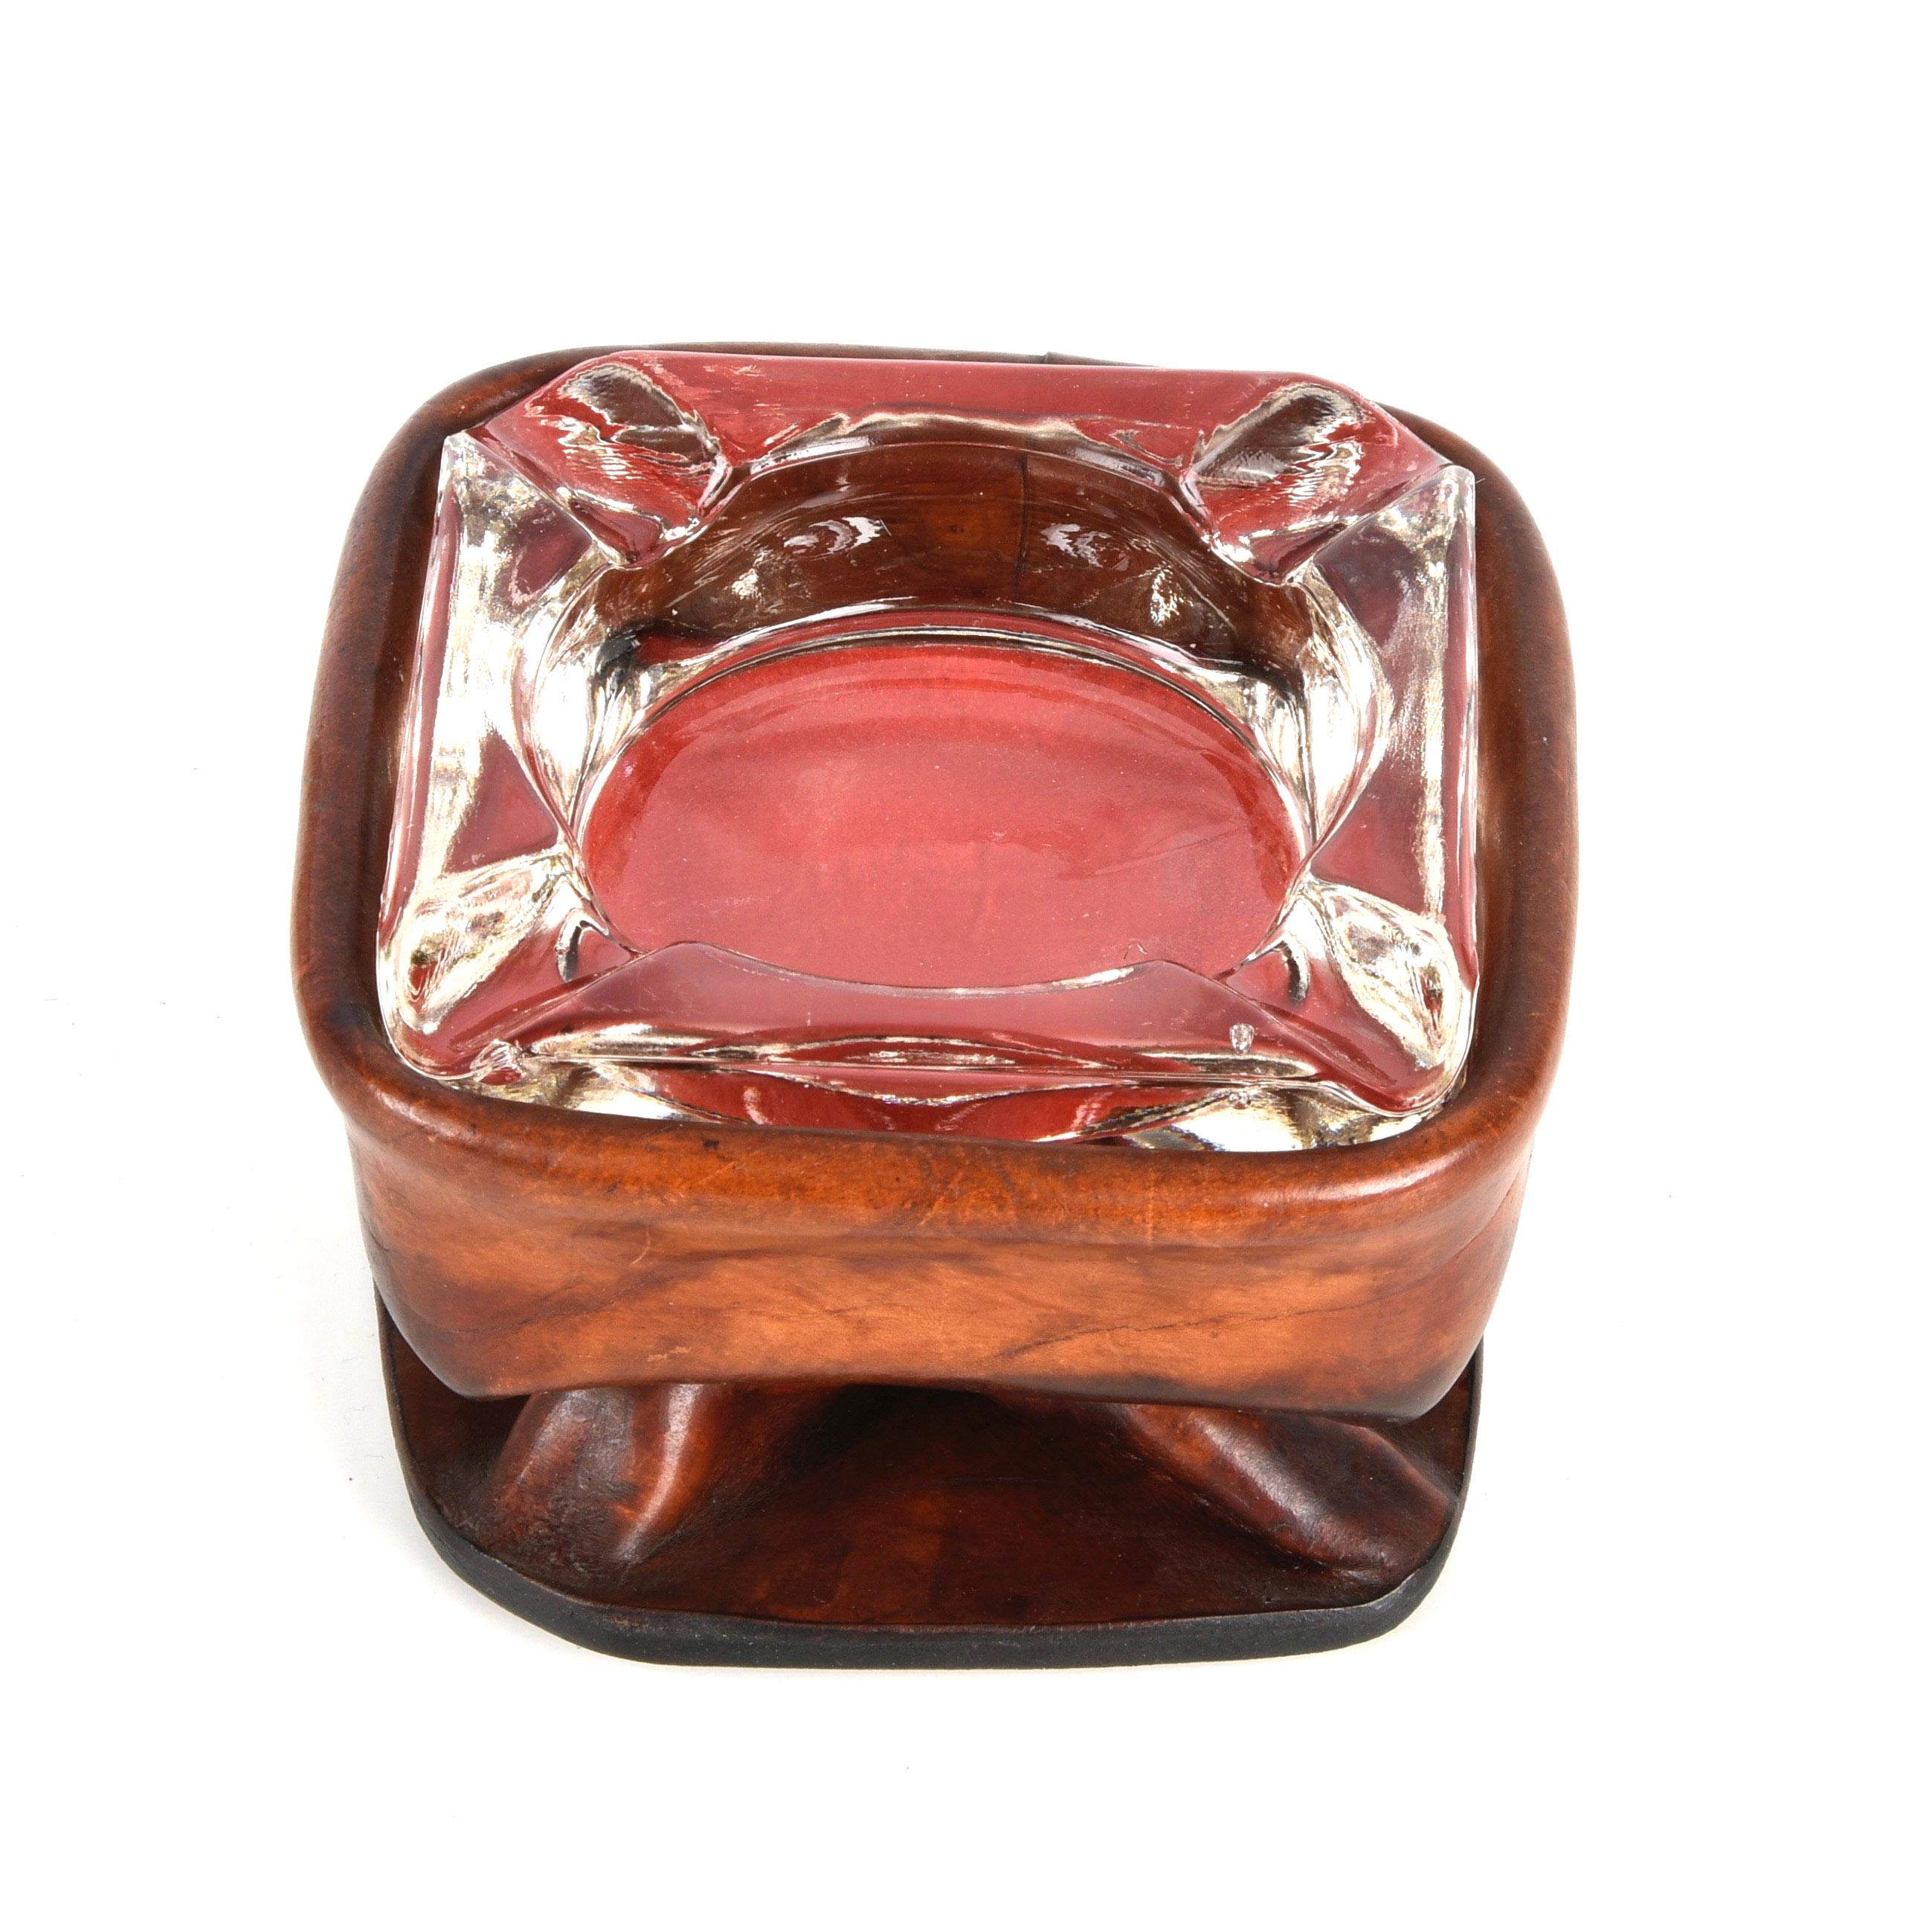 Jacques Adnet Midcentury Brown Leather and Glass French Ashtray, 1950s For Sale 2